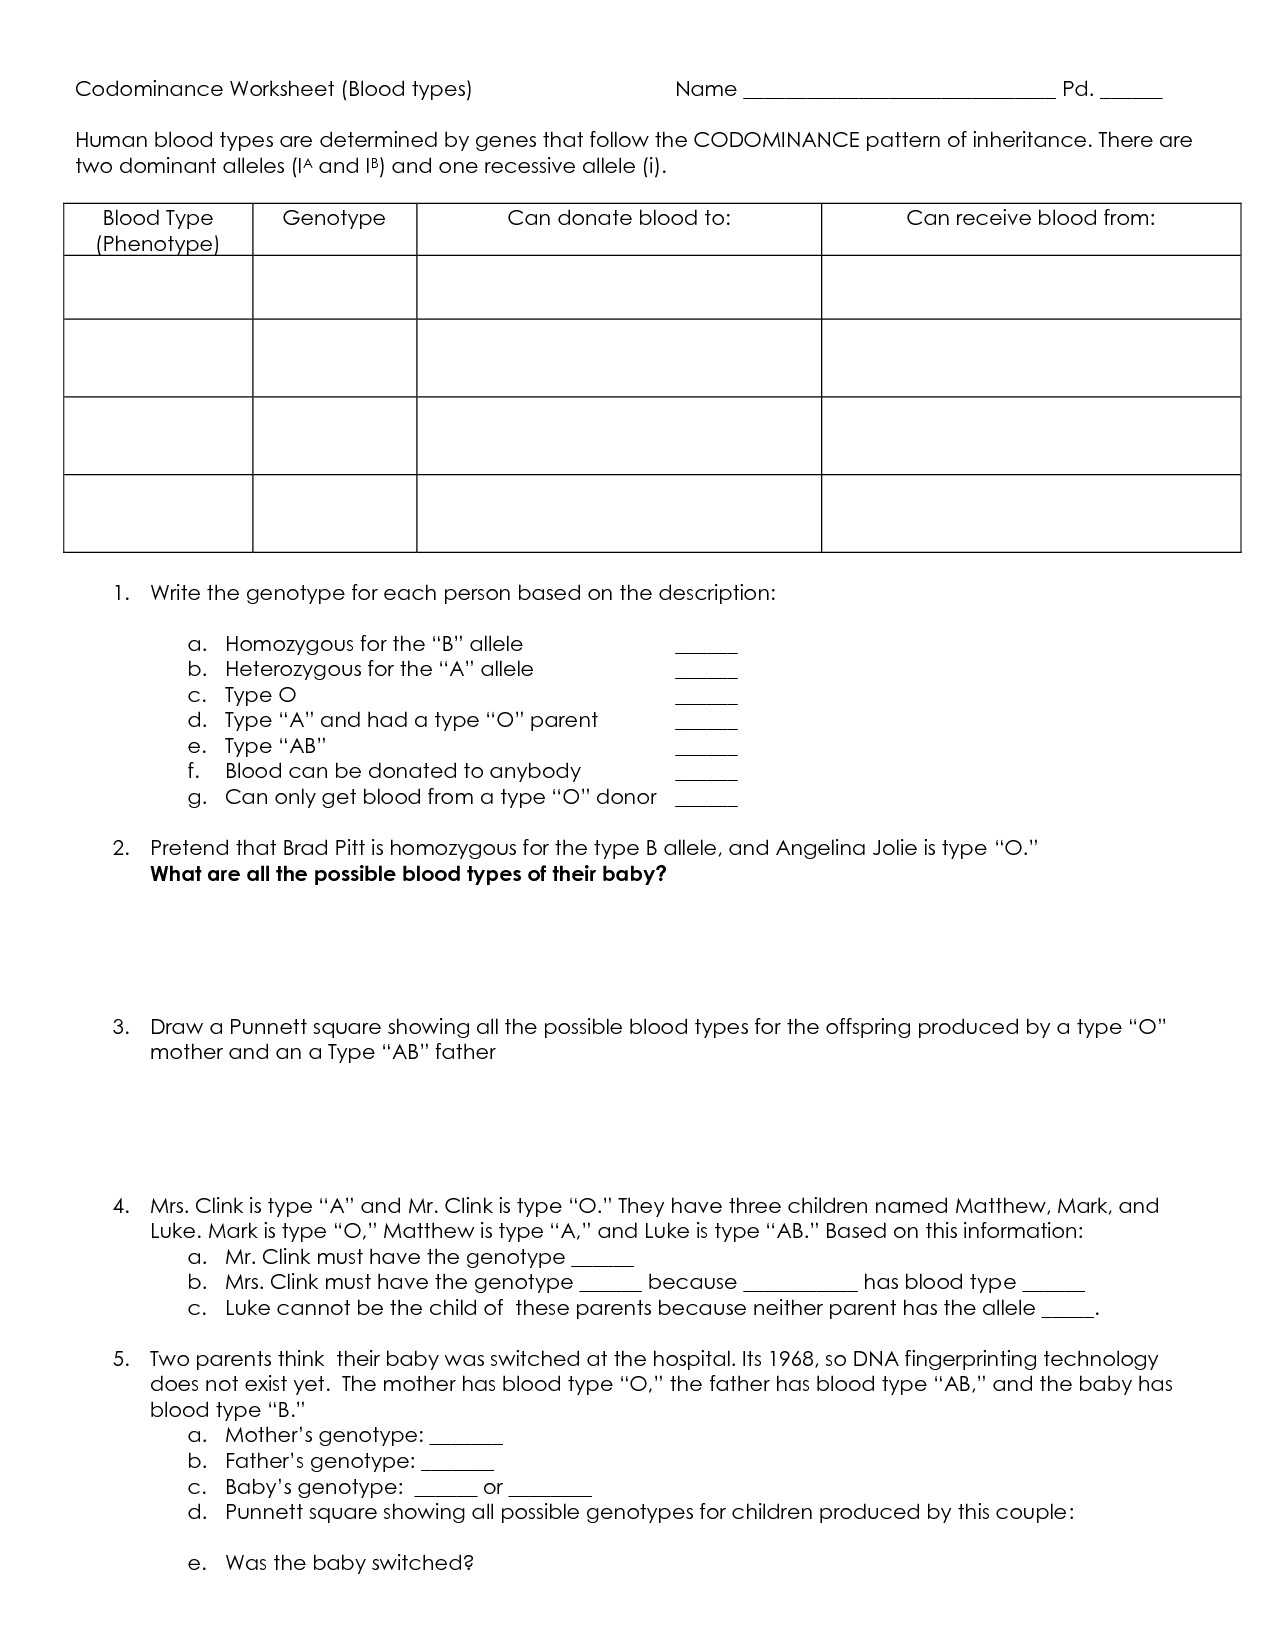 Codominance Incomplete Dominance Worksheet Answers with Codominance In Plete Dominance Worksheet Answers Inspirational In